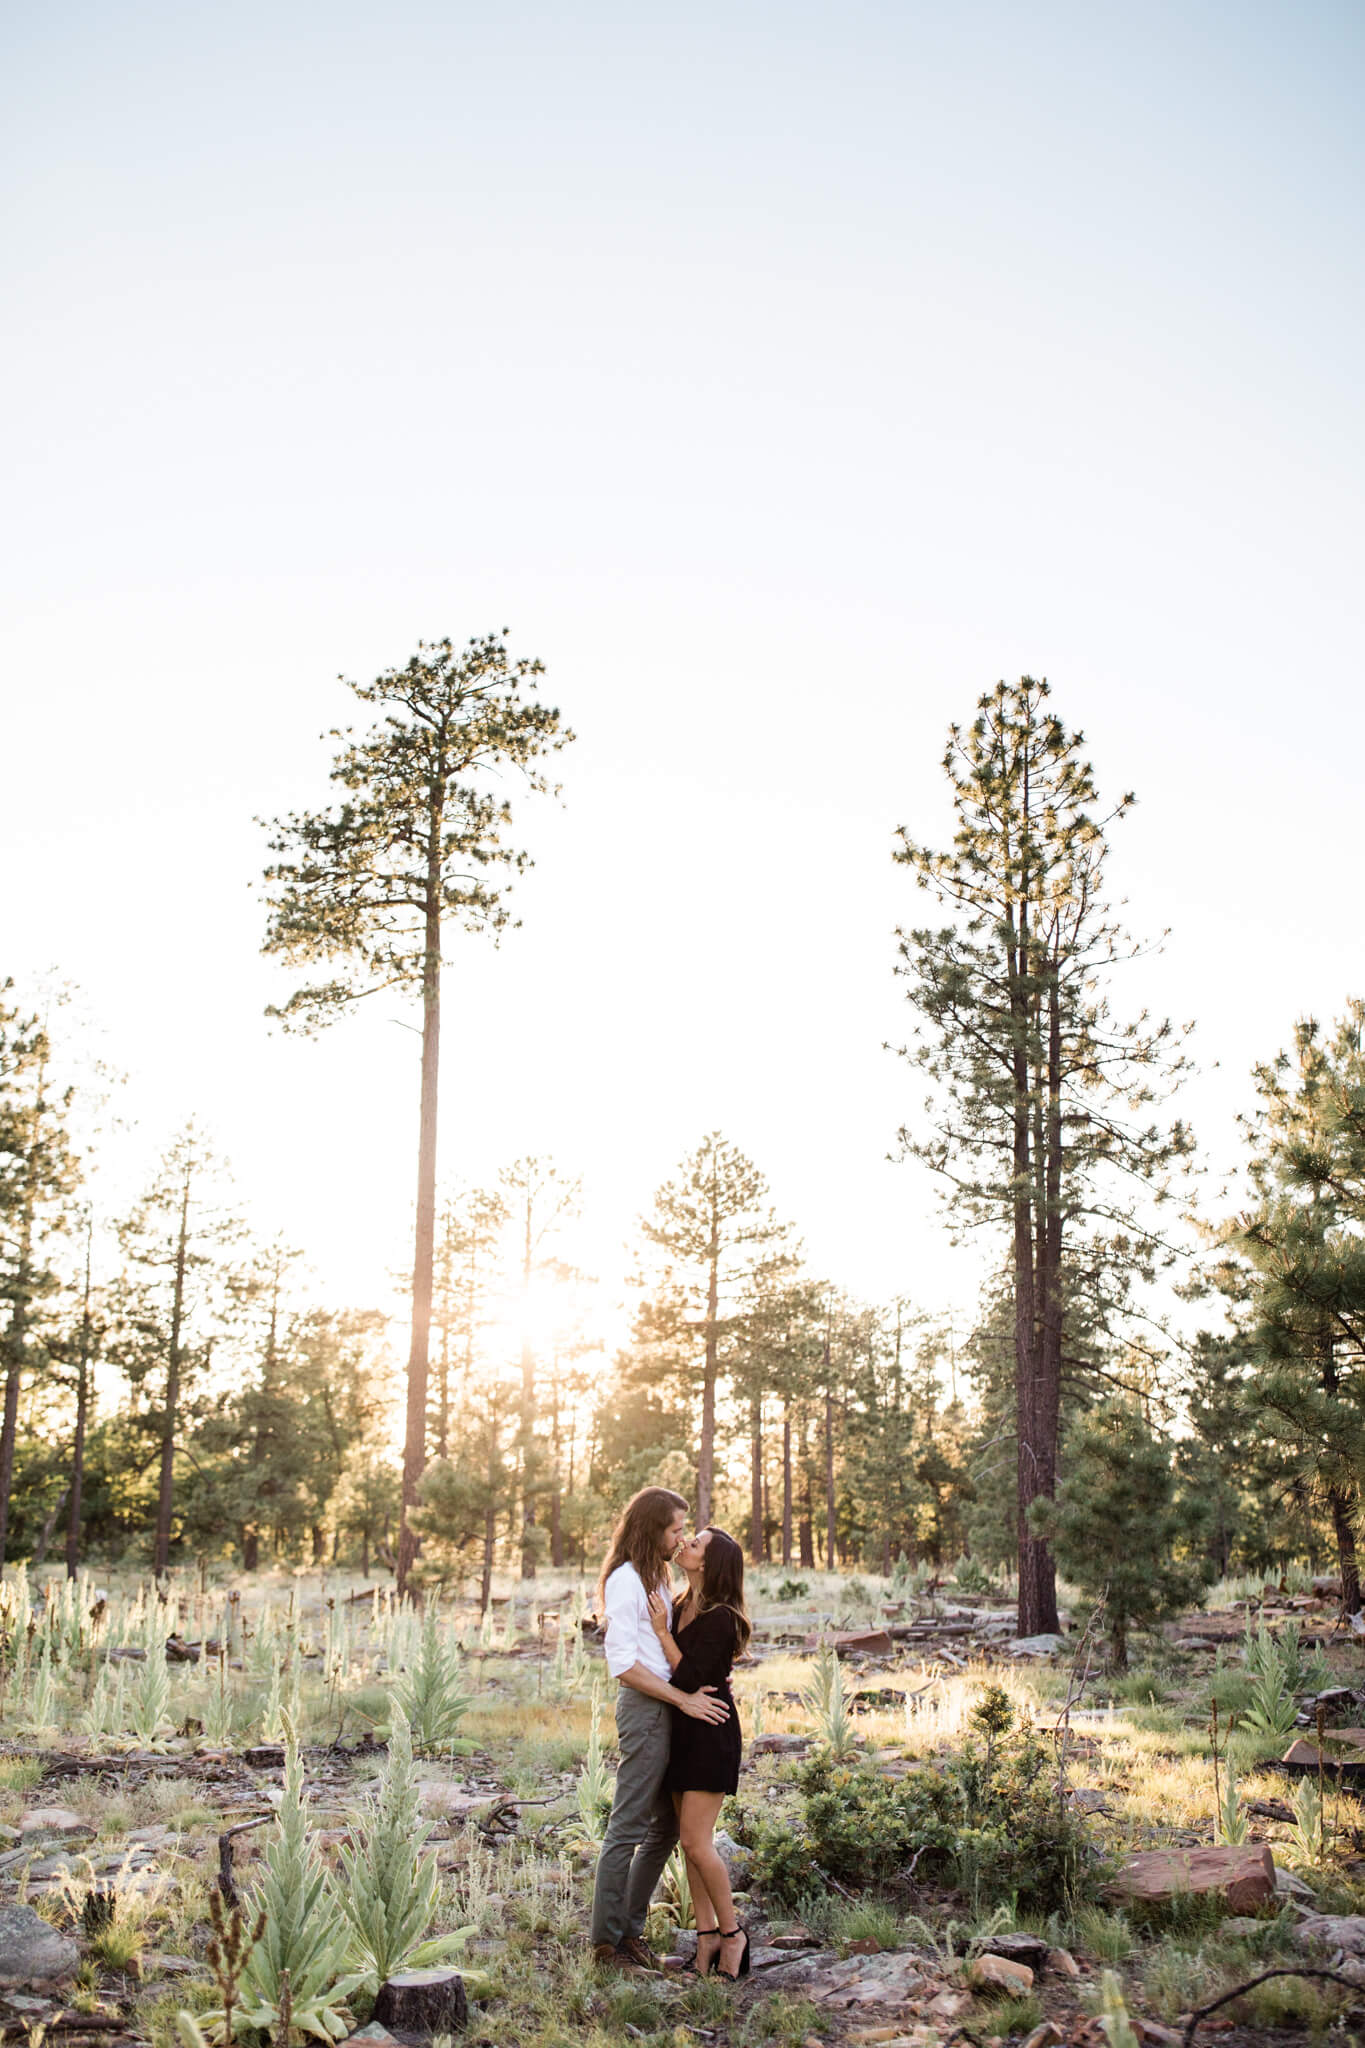 Engaged couple stands in a meadow surrounded by trees during their forest engagement photo session.